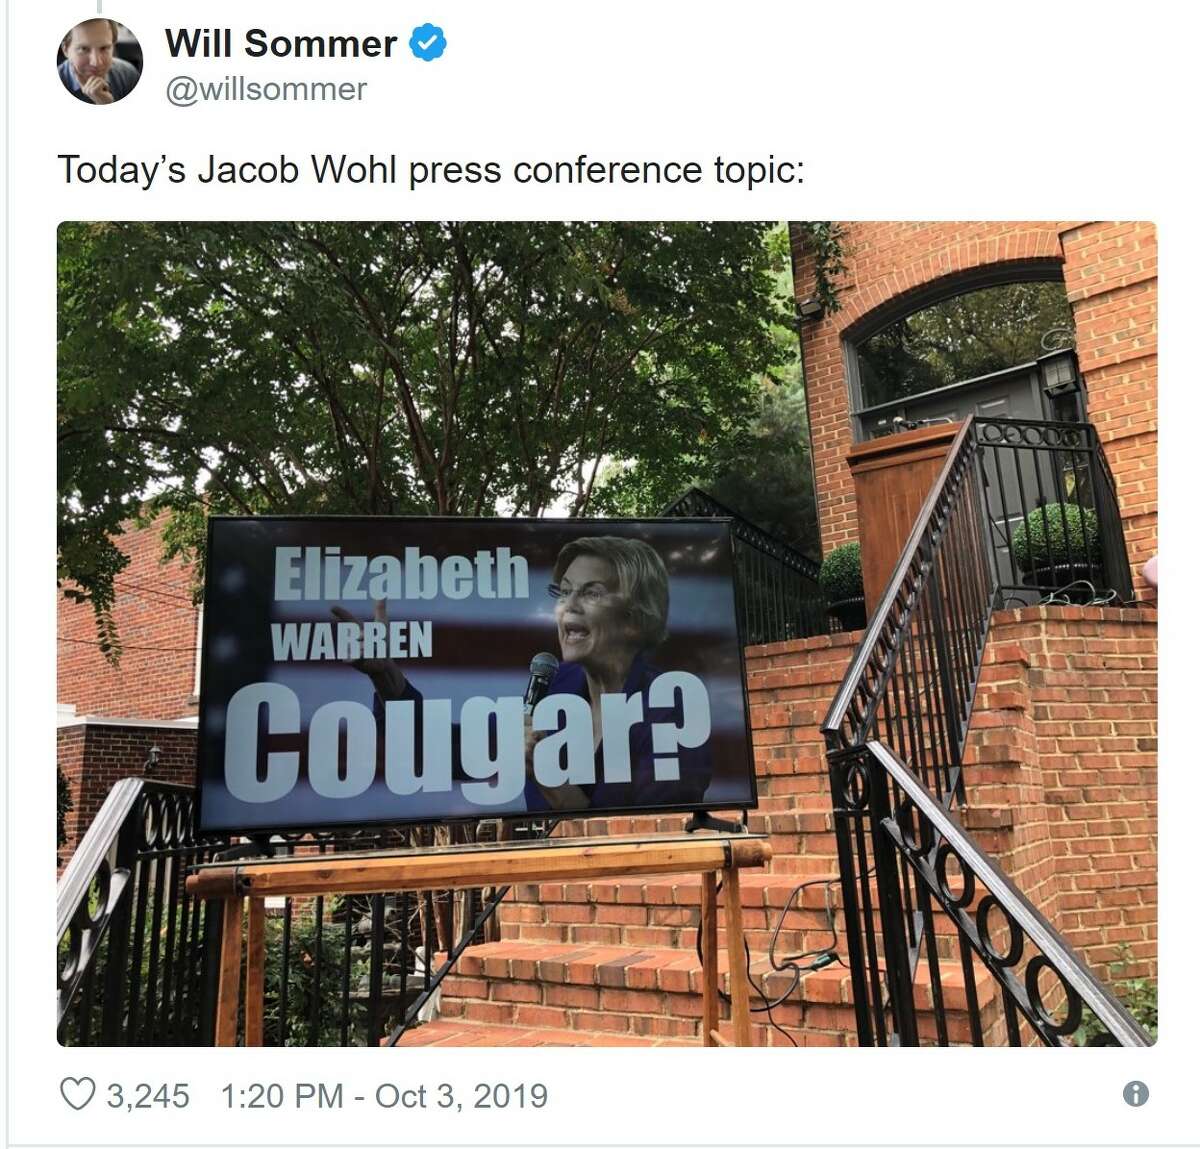 Elizabeth Warren tweets a play on words about being a UH “cougar” alumna while at the center of an alleged “sex scandal” with a younger man. 